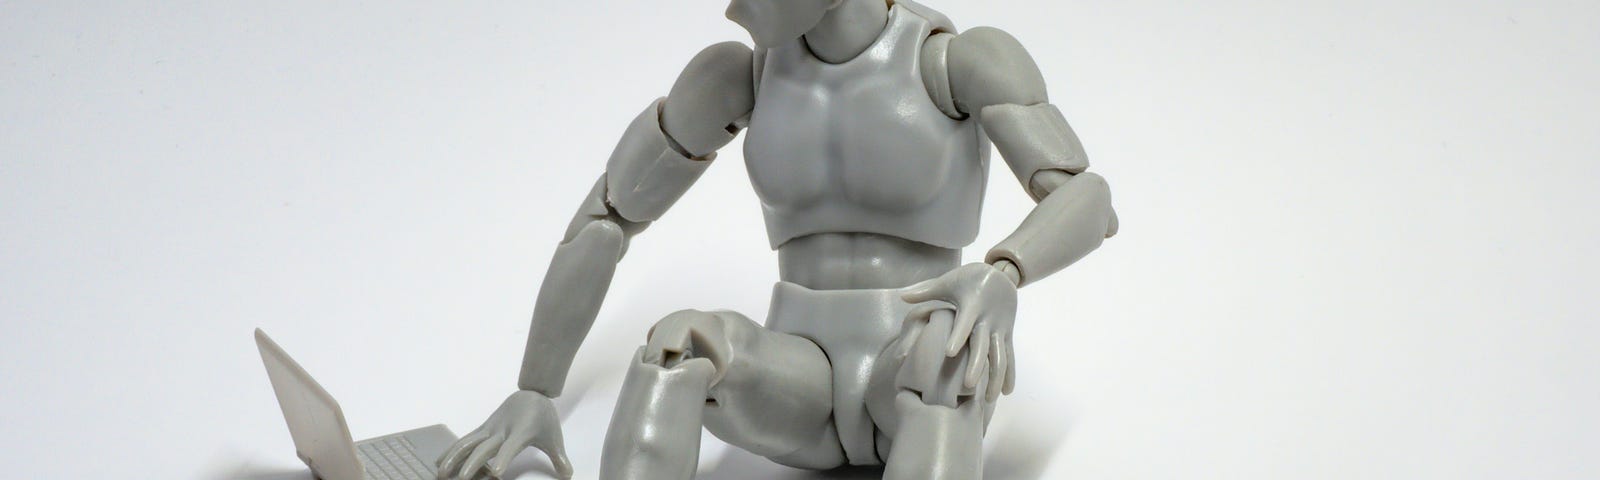 An image of a model of a robot using a model laptop